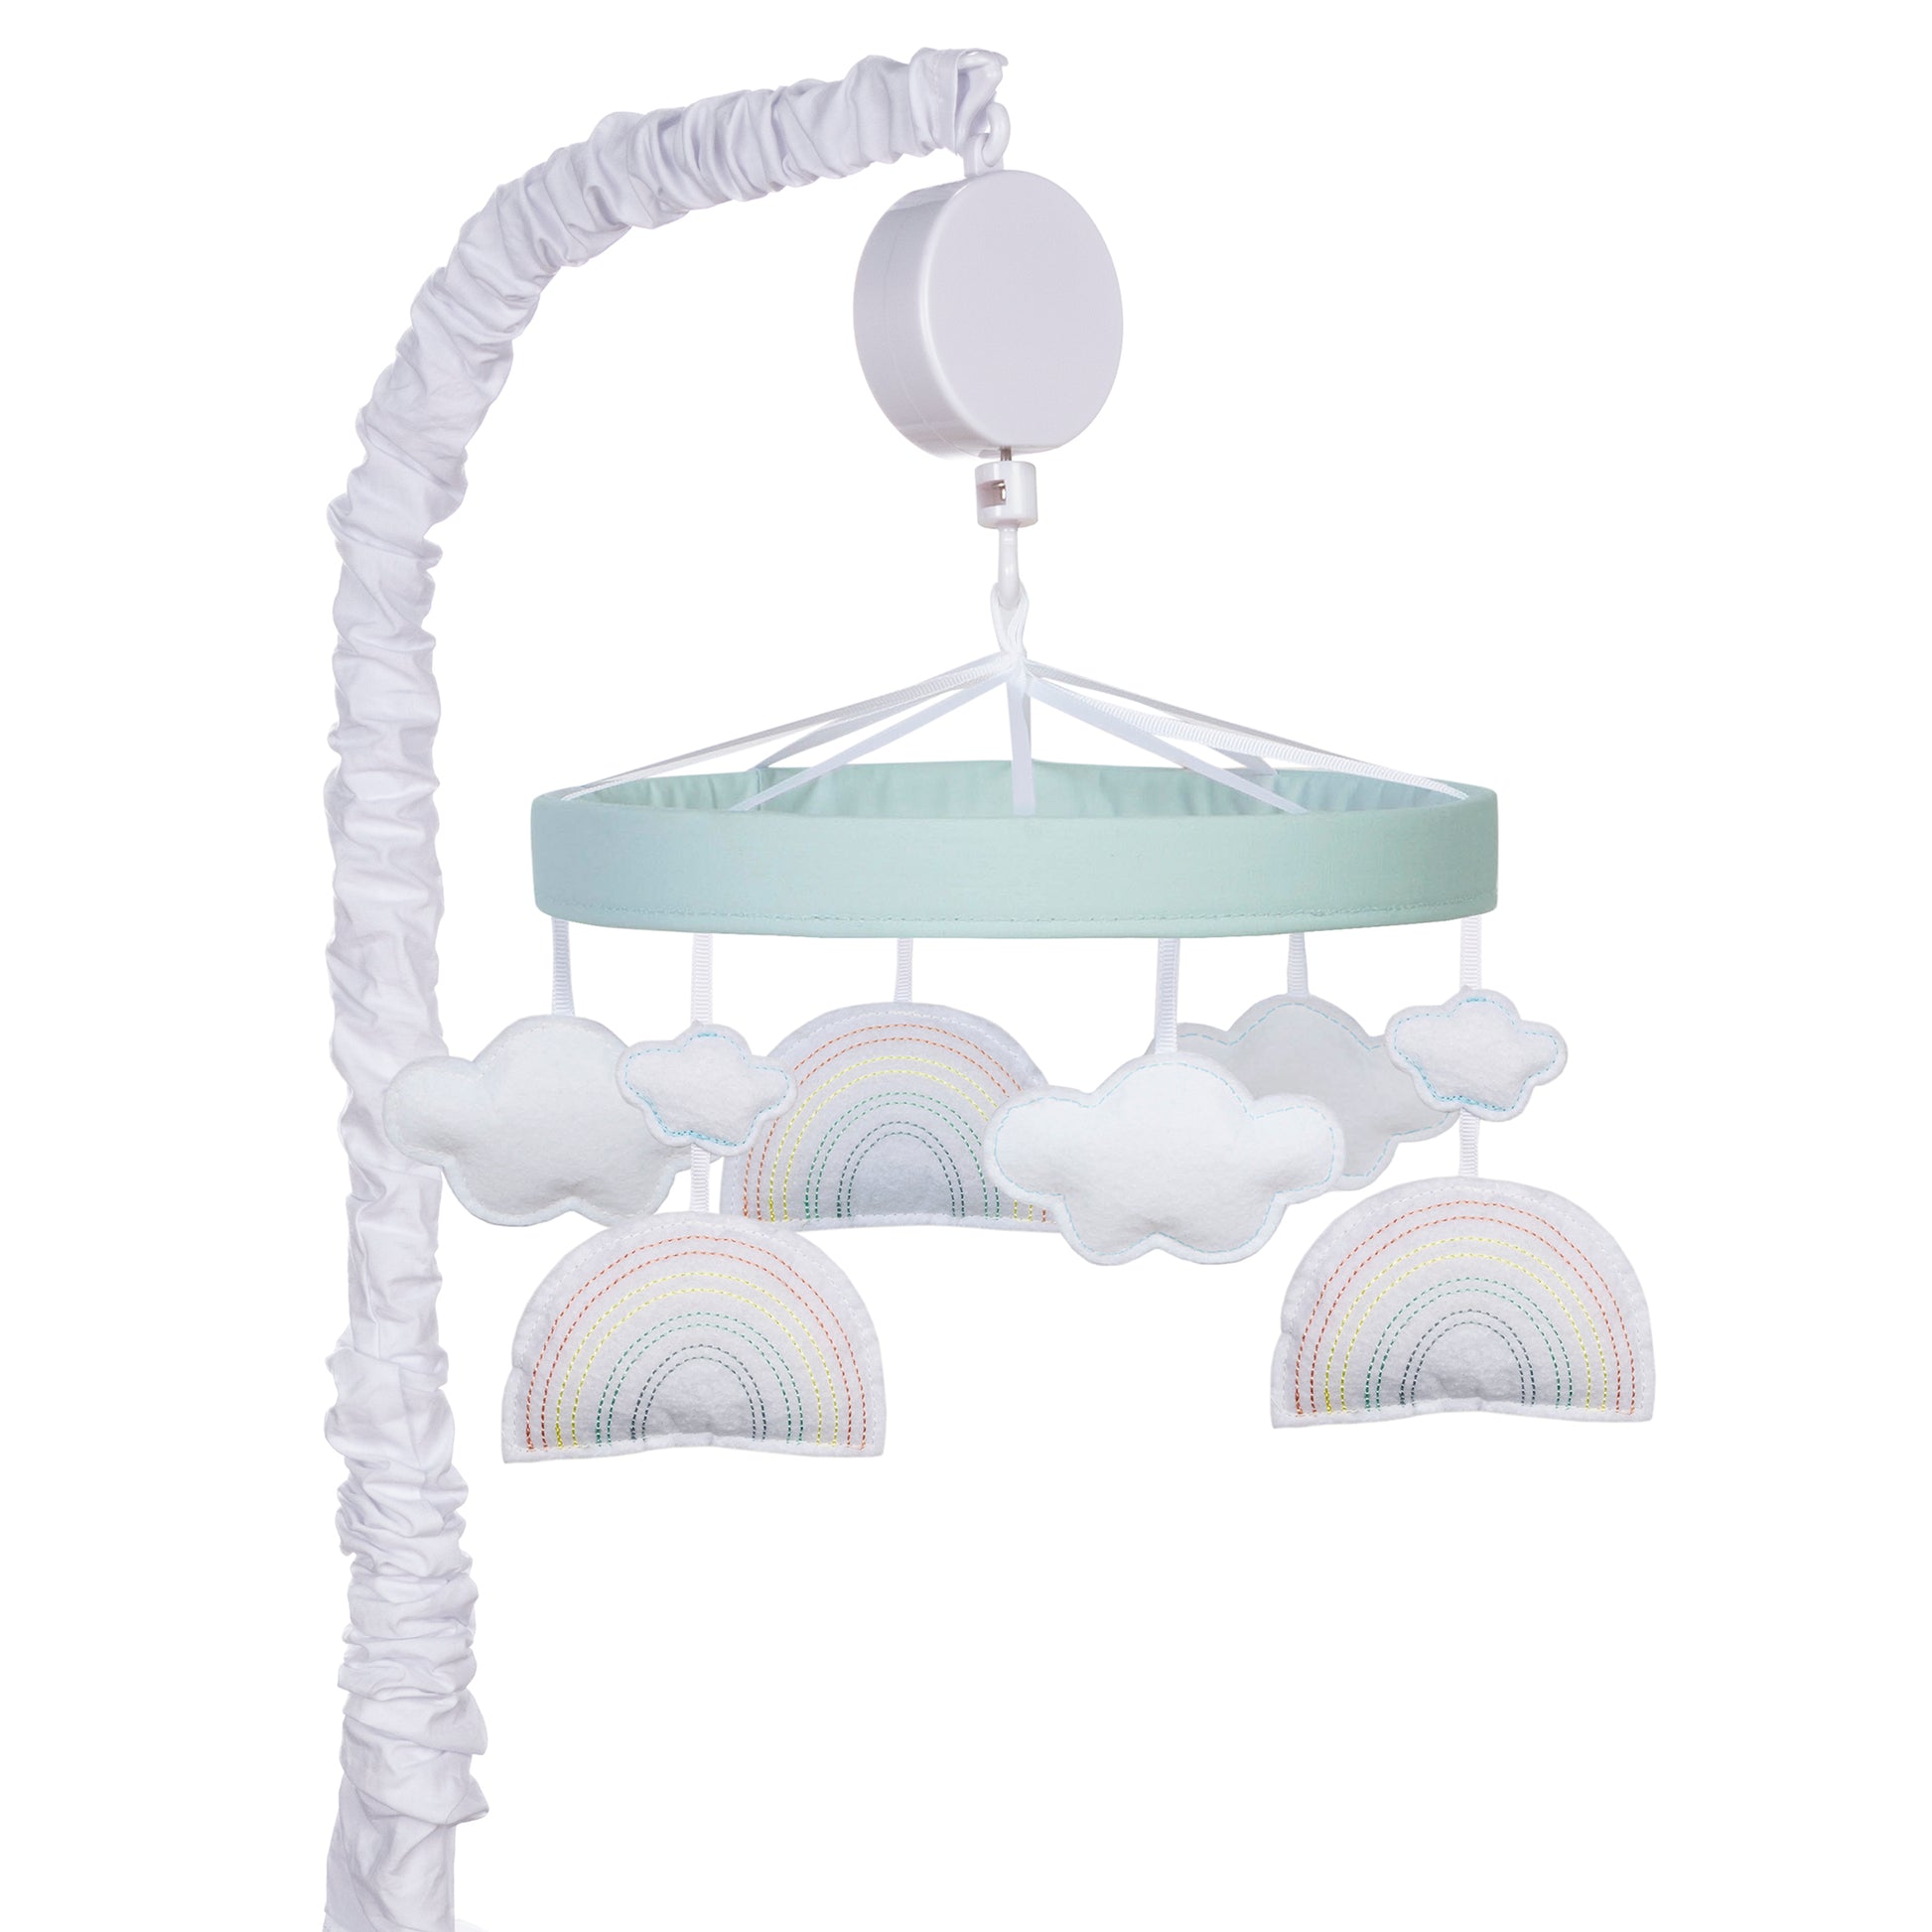 Encourage eye tracking and sound perception skills with this Rainbow Clouds Musical Crib Mobile by Trend Lab.